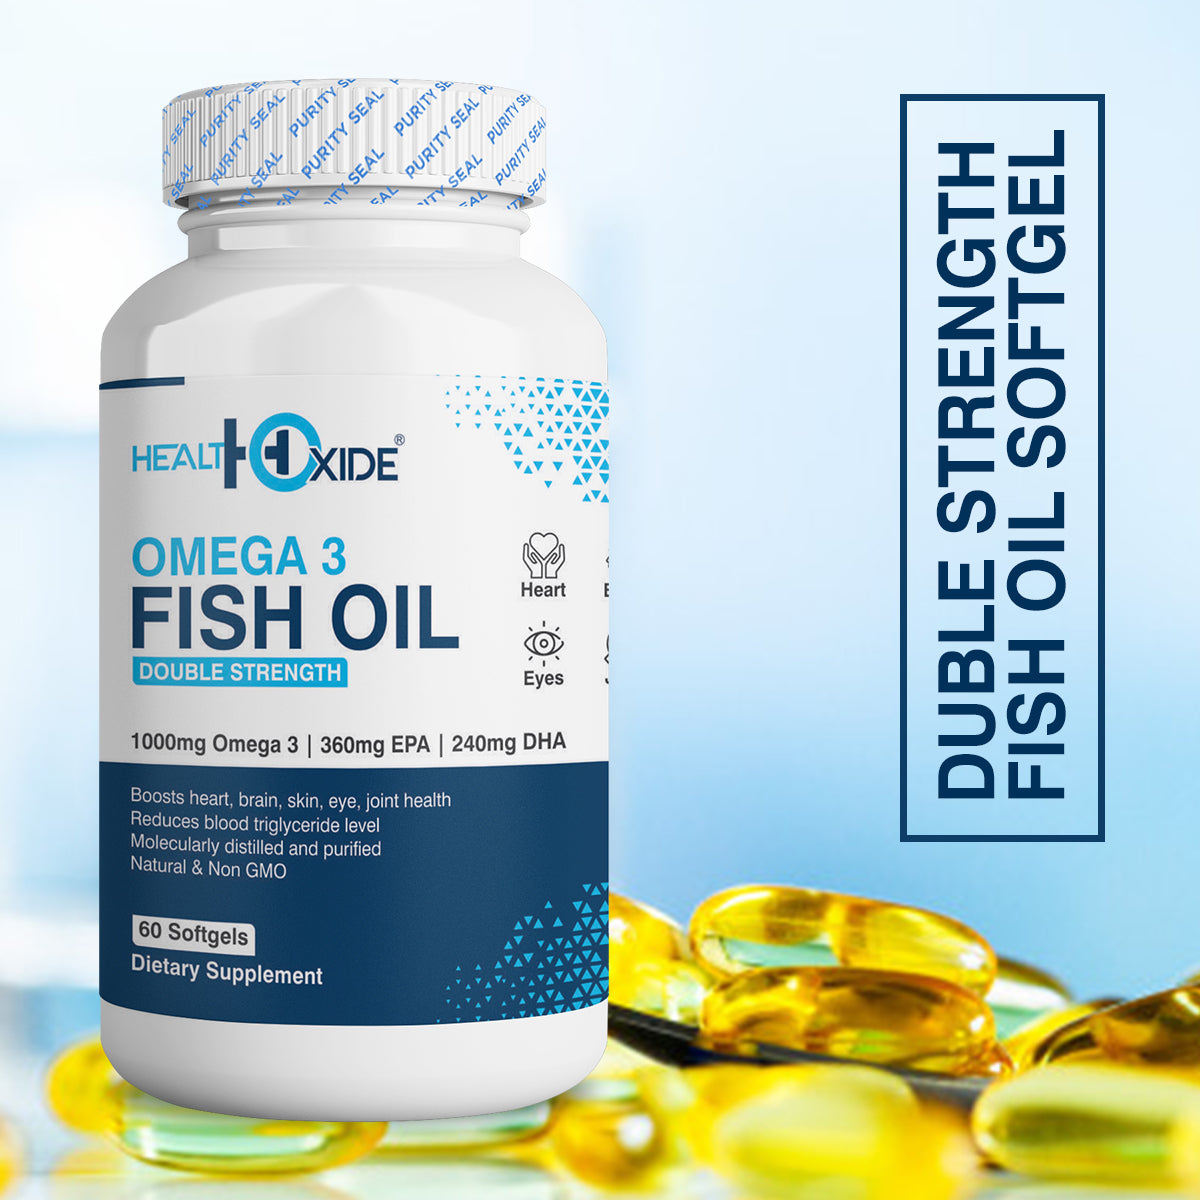 Buy1get2-Buy Omega 3 Fish Oil and Get Men's Testo Perform Gold and Immunity Booster